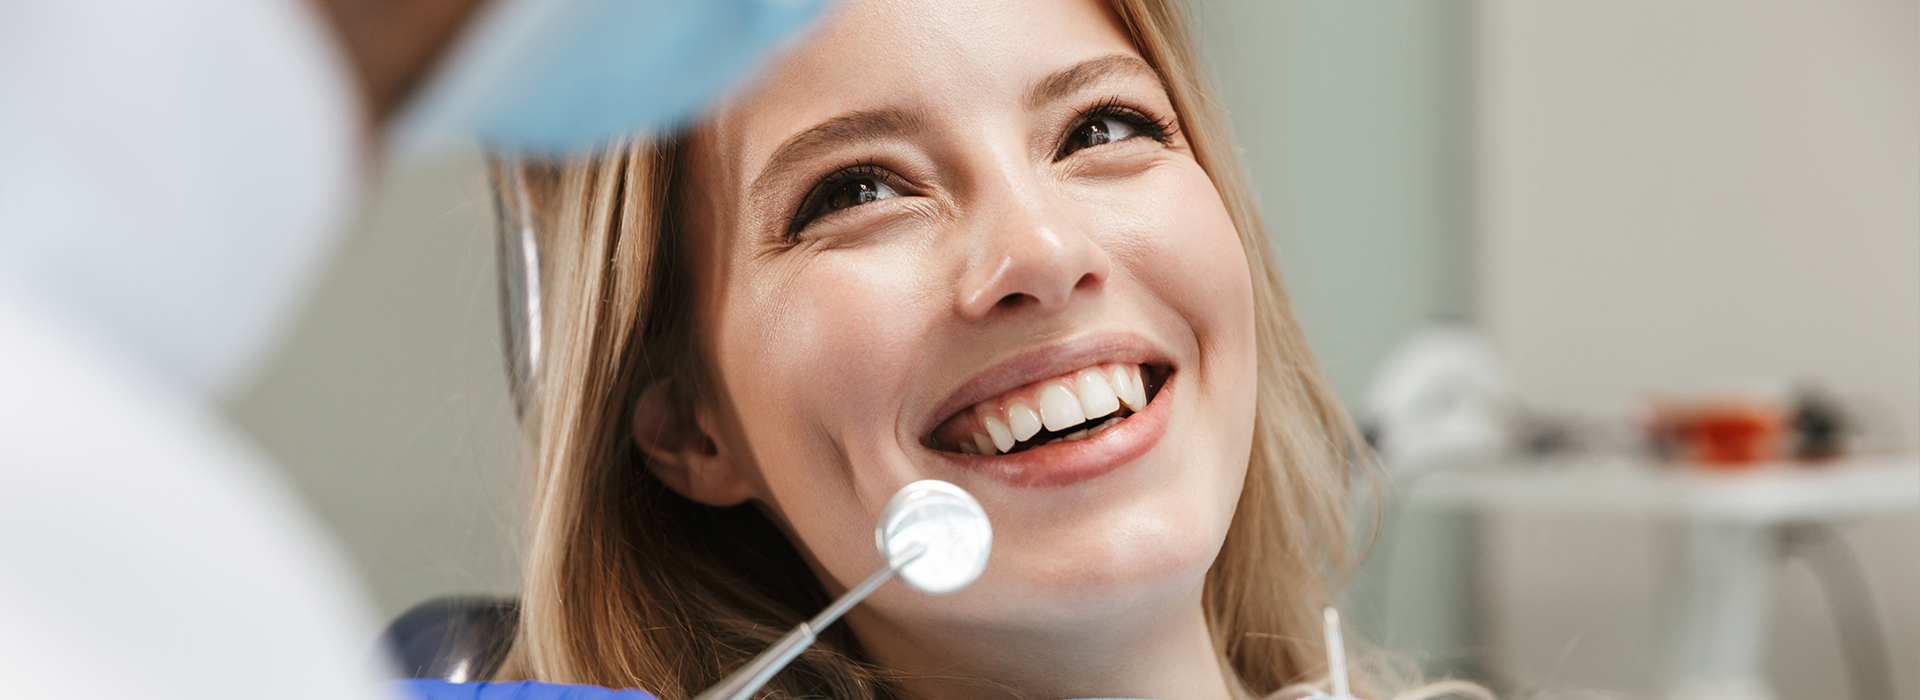 Cherry Hill Dental Excellence | Restorative Dentistry, Oral   Maxillofacial Surgery and Botox for TMJ and Headache Pain